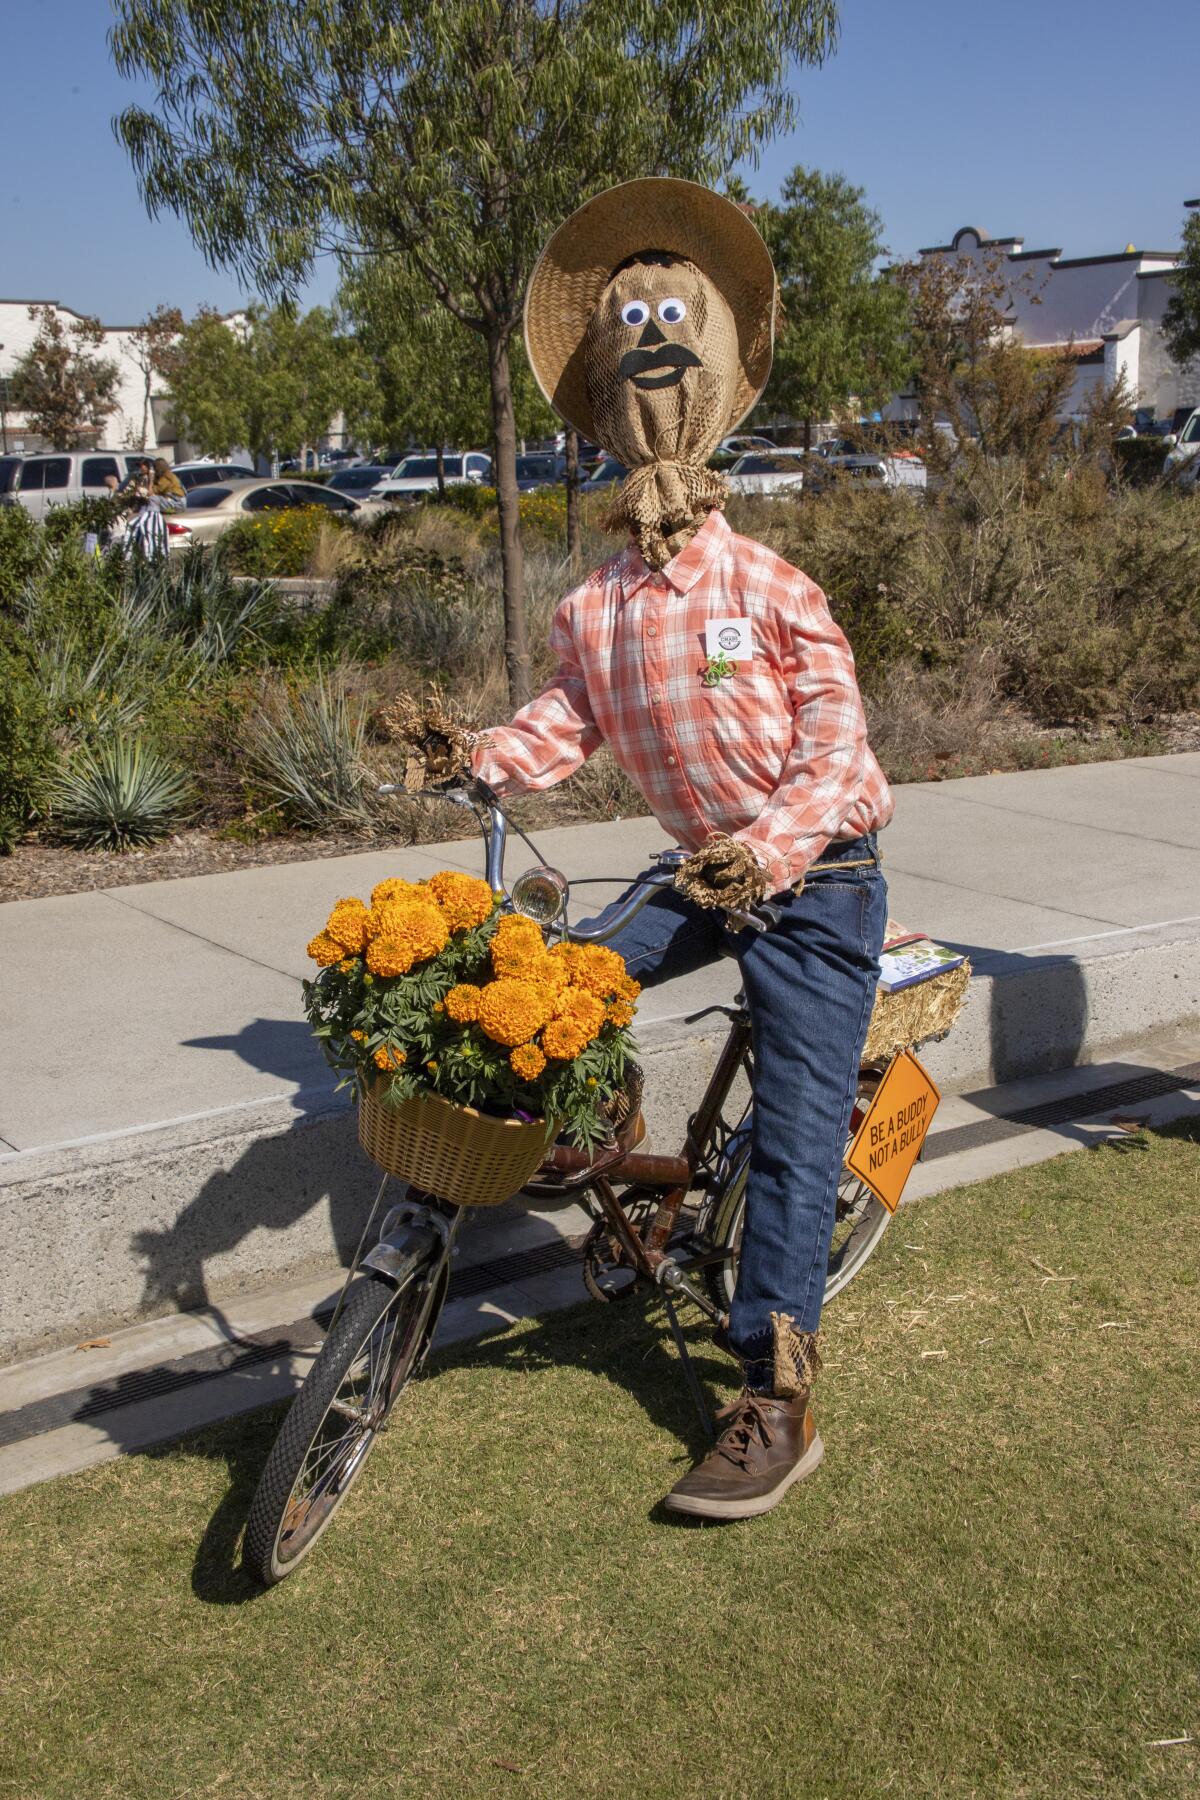 "Scarecrow on Wheels" from the Costa Mesa Alliance for Better Streets.